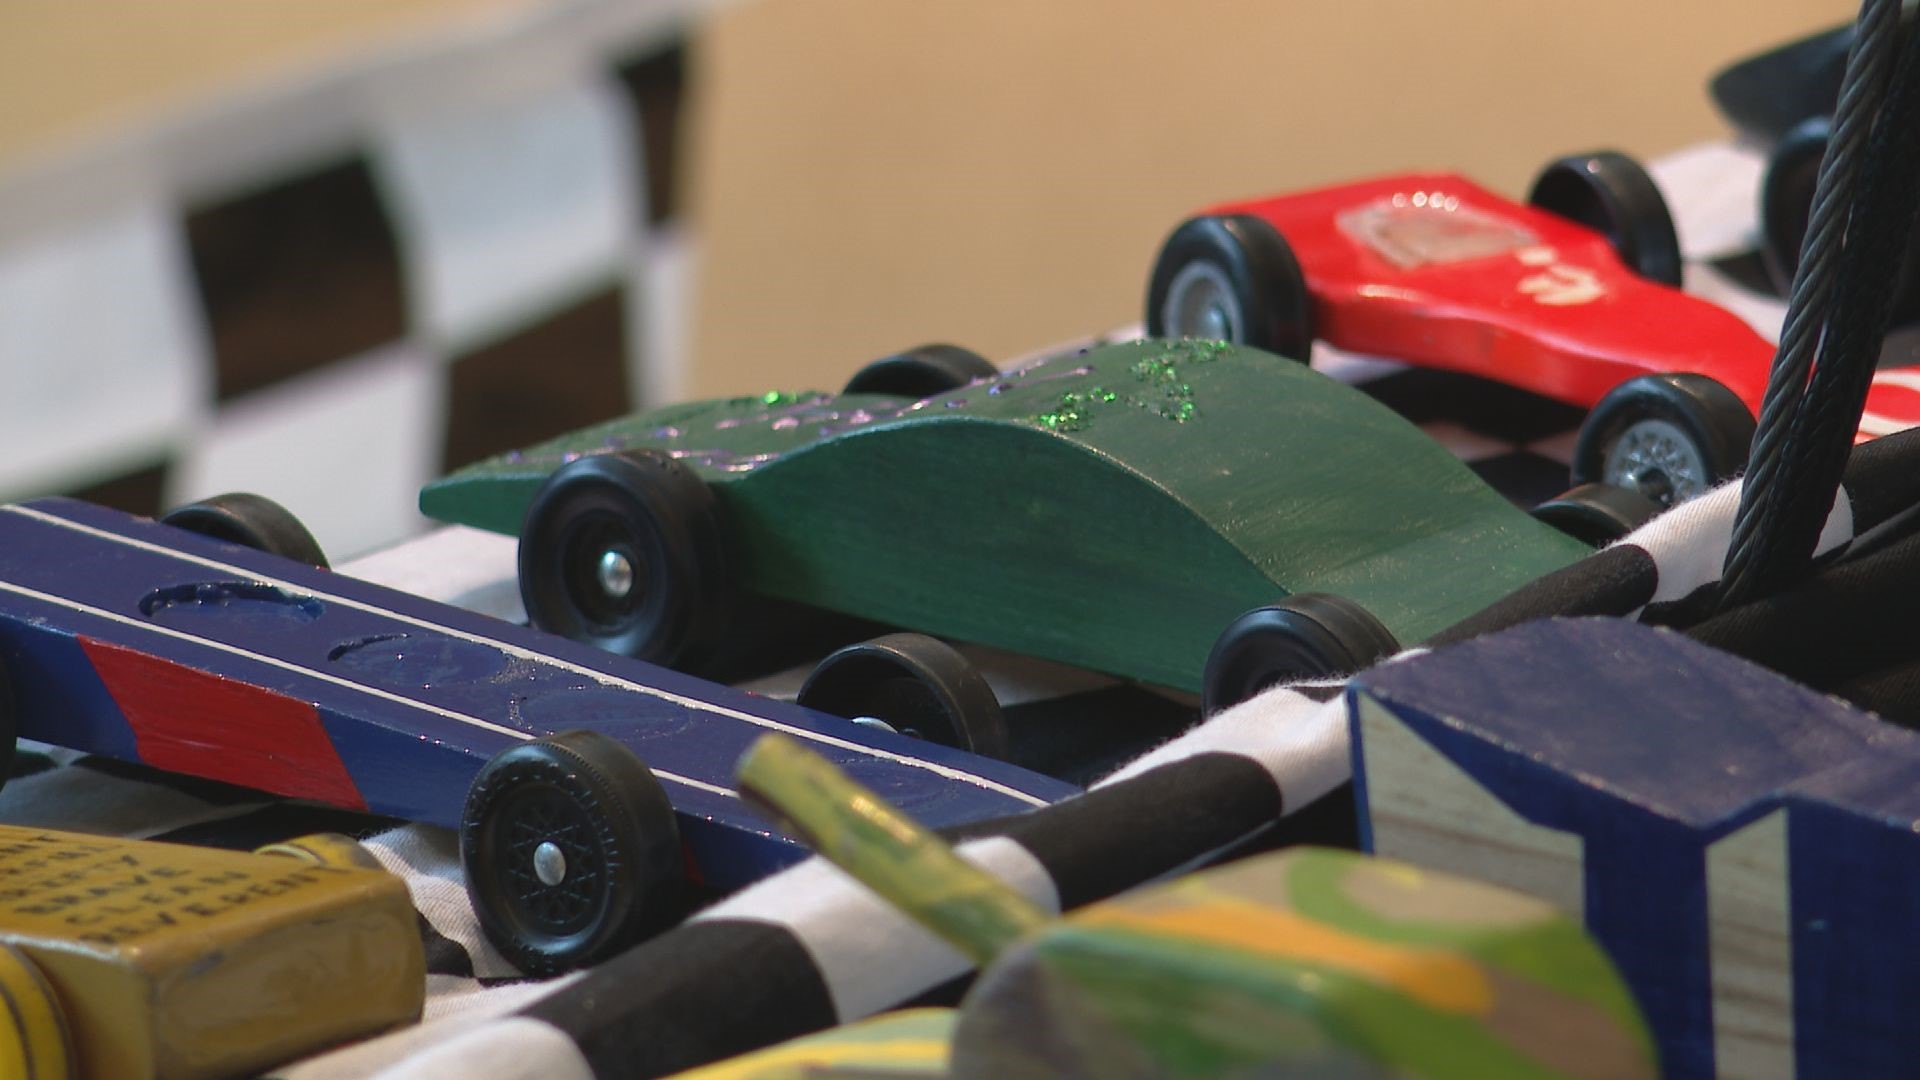 Pinewood Derby track back at Indiana State Museum